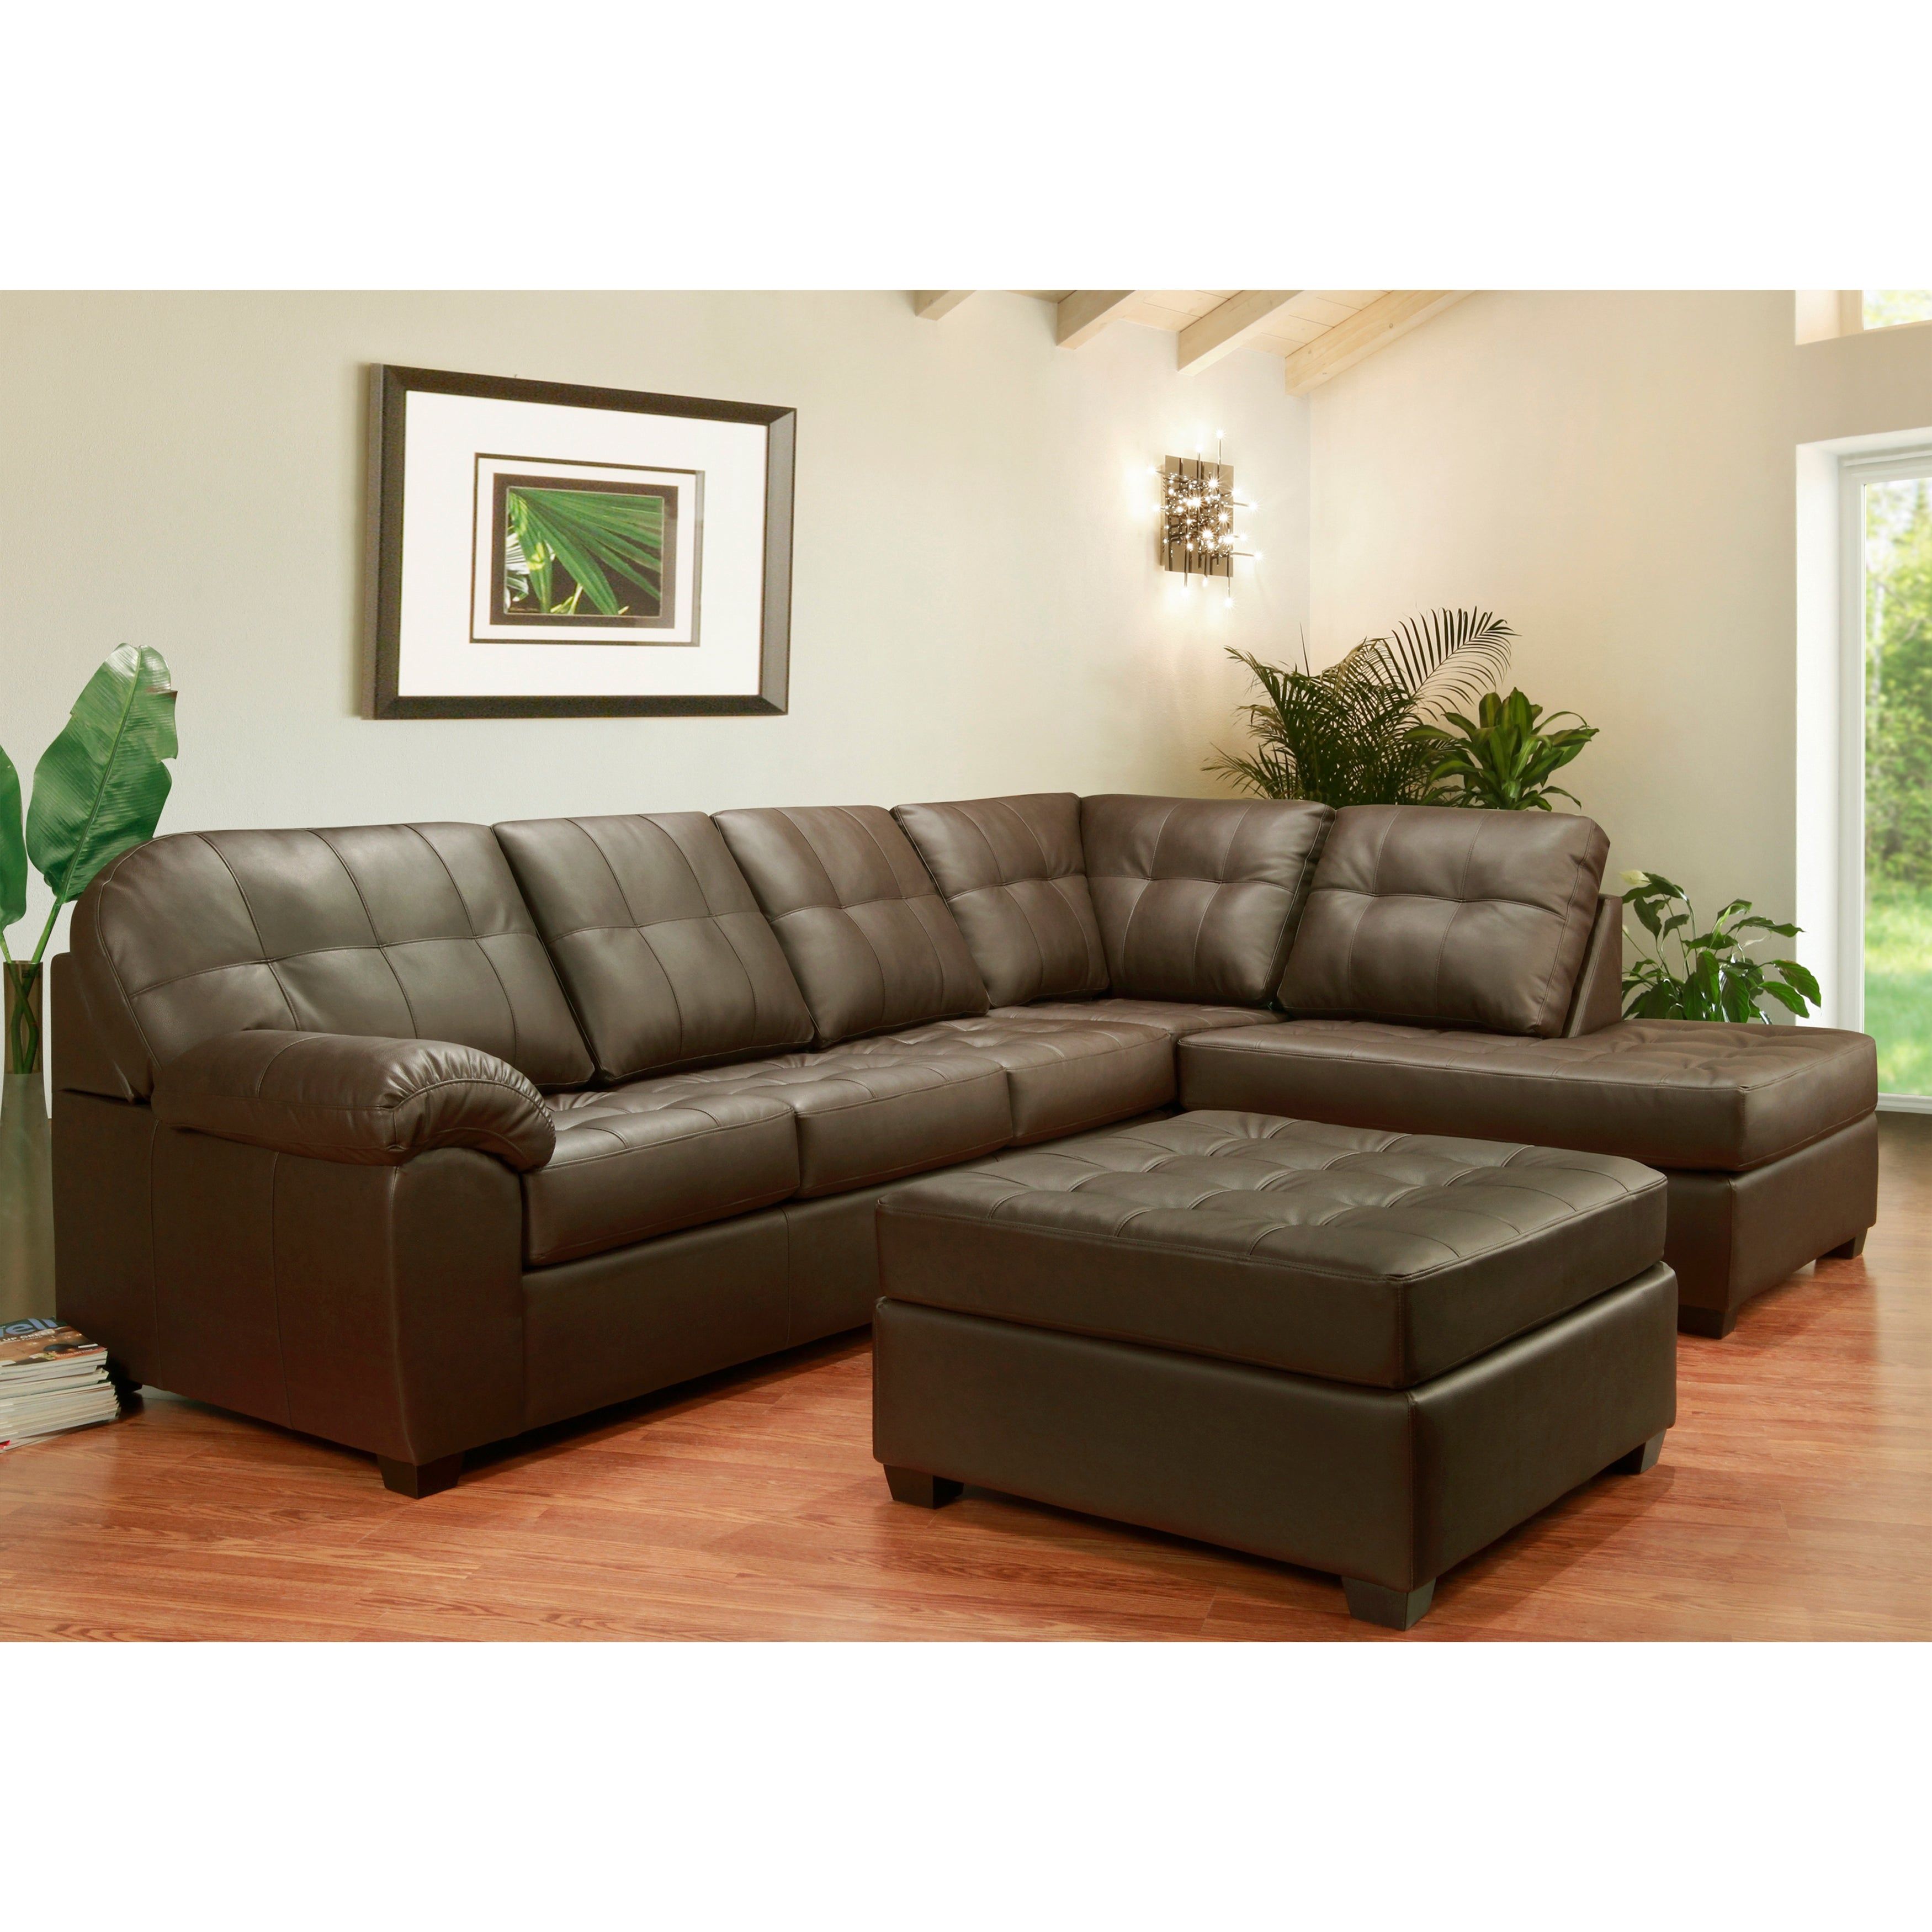 Emerson Top Grain Leather Sectional Sofa And Ottoman – On Sale – – 23572830 With Sectional Sofas With Ottomans And Tufted Back Cushion (View 6 of 15)